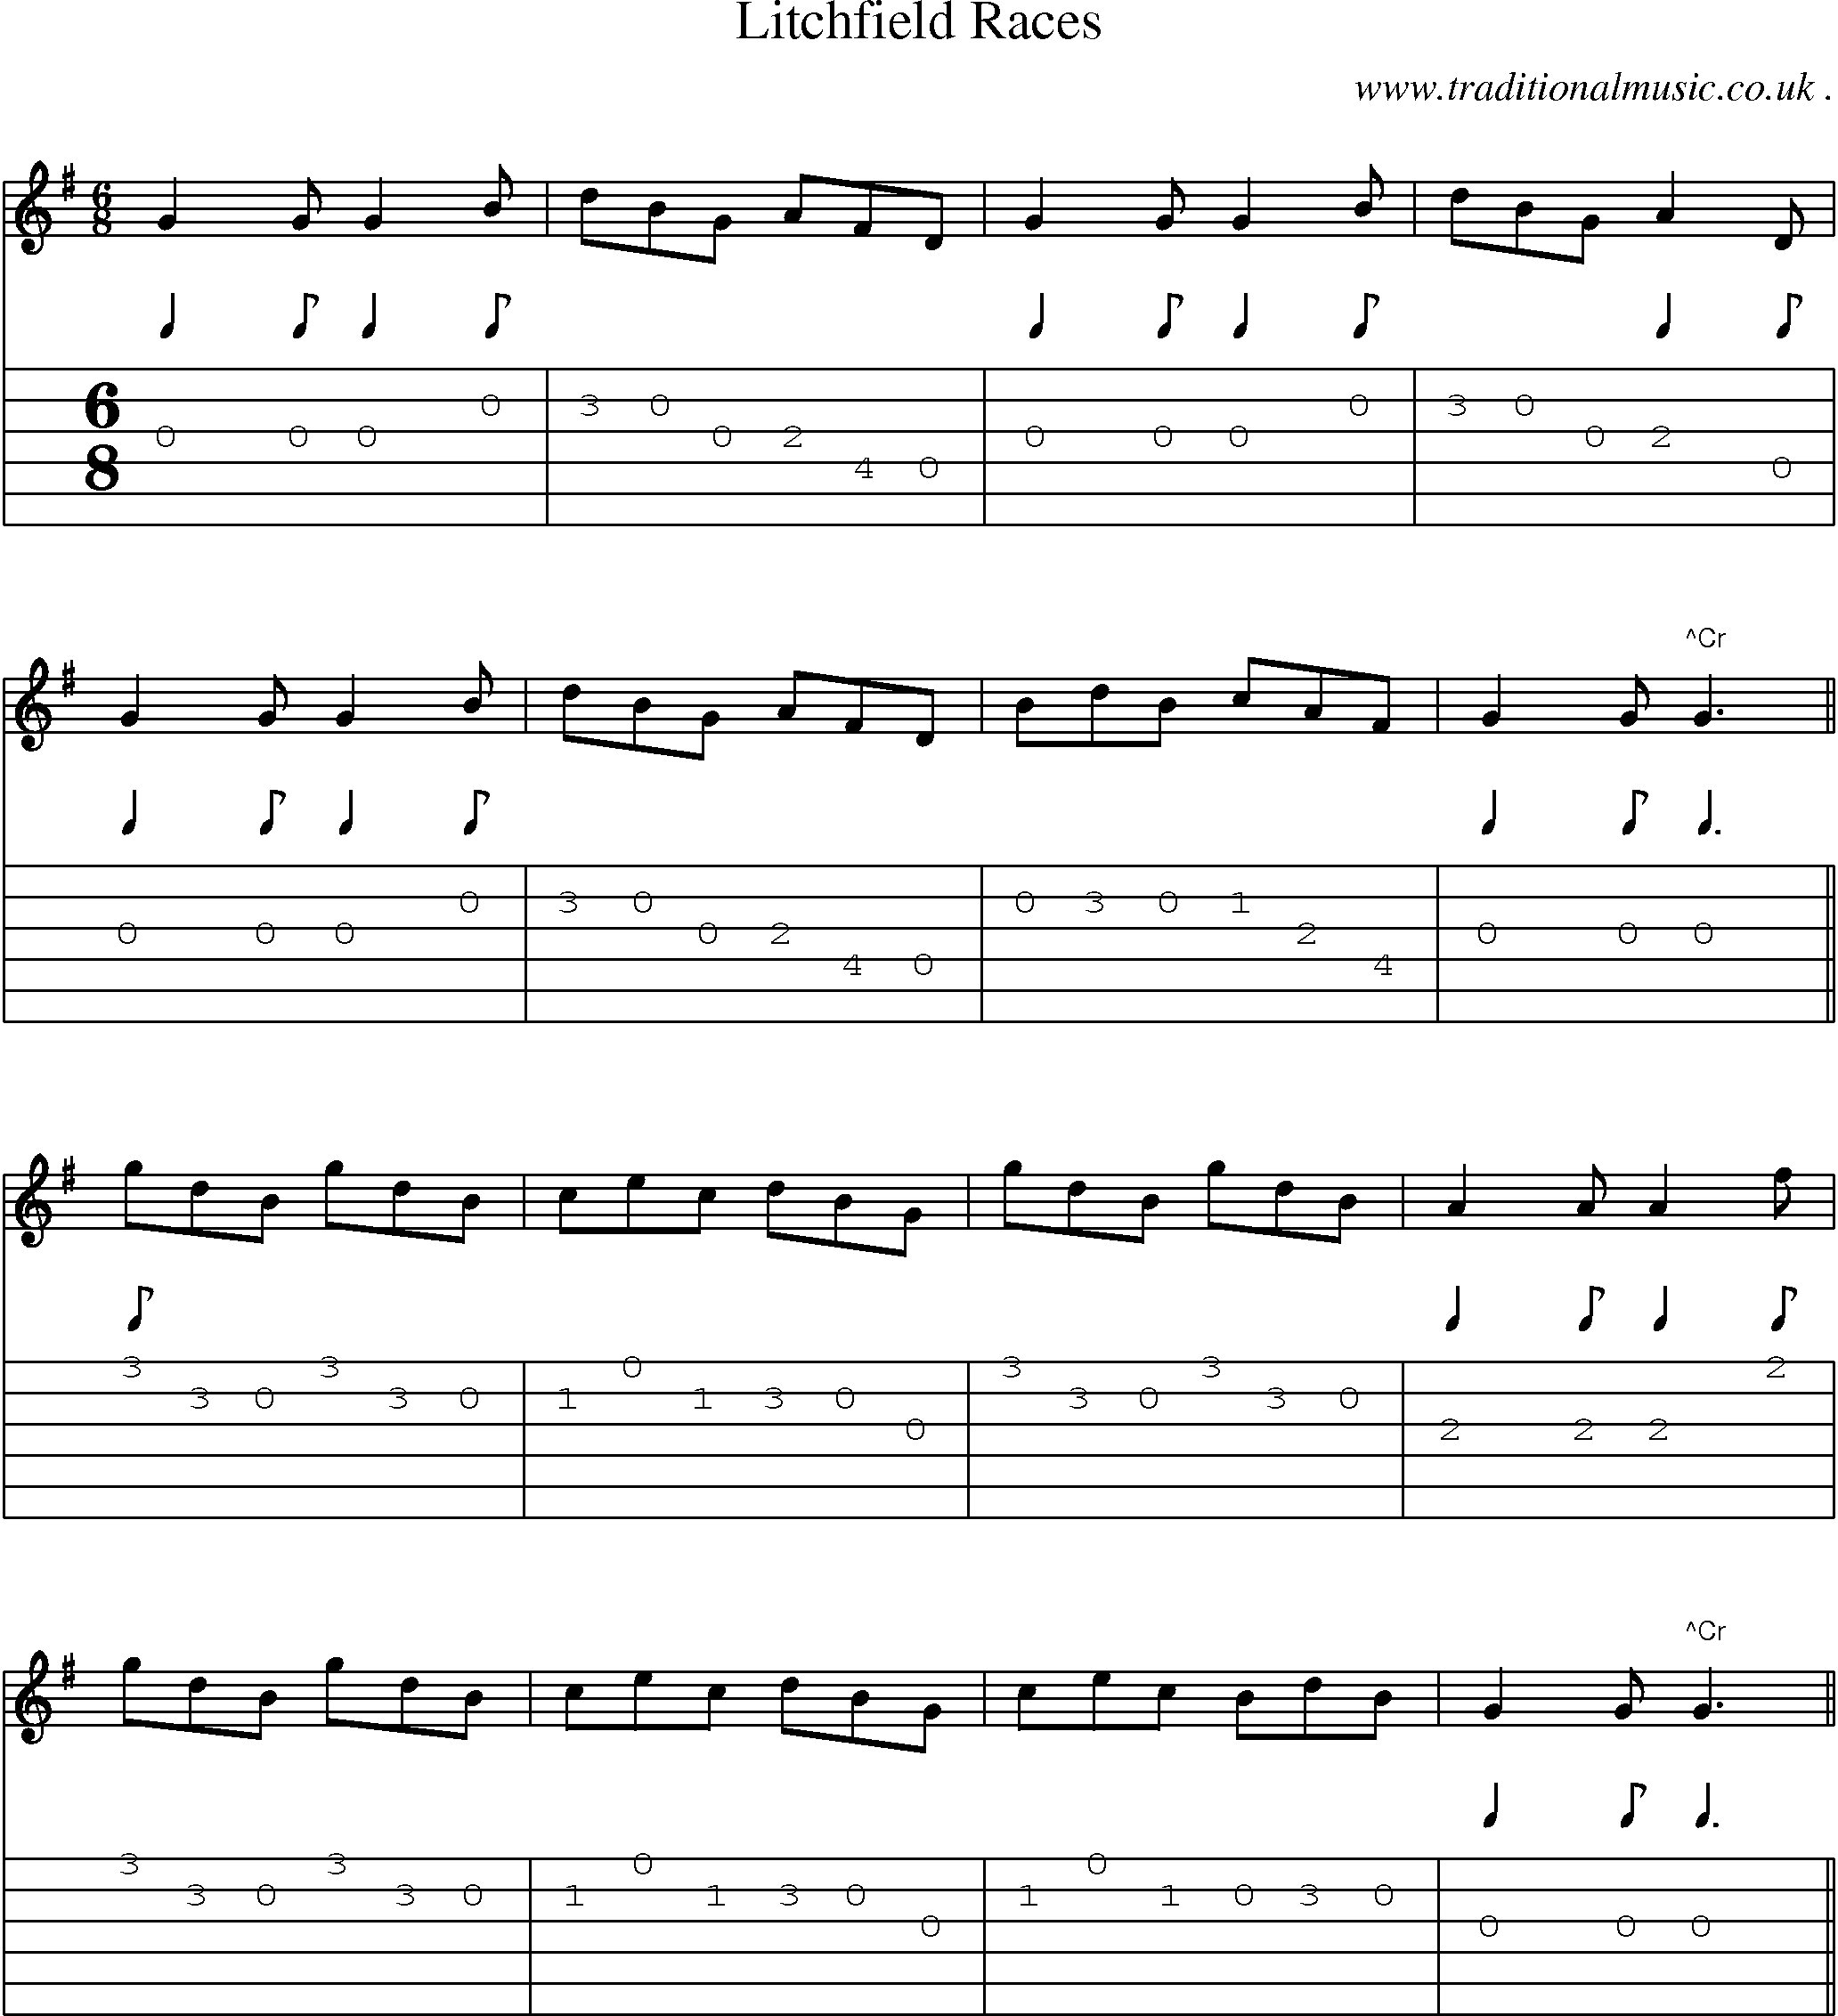 Sheet-Music and Guitar Tabs for Litchfield Races